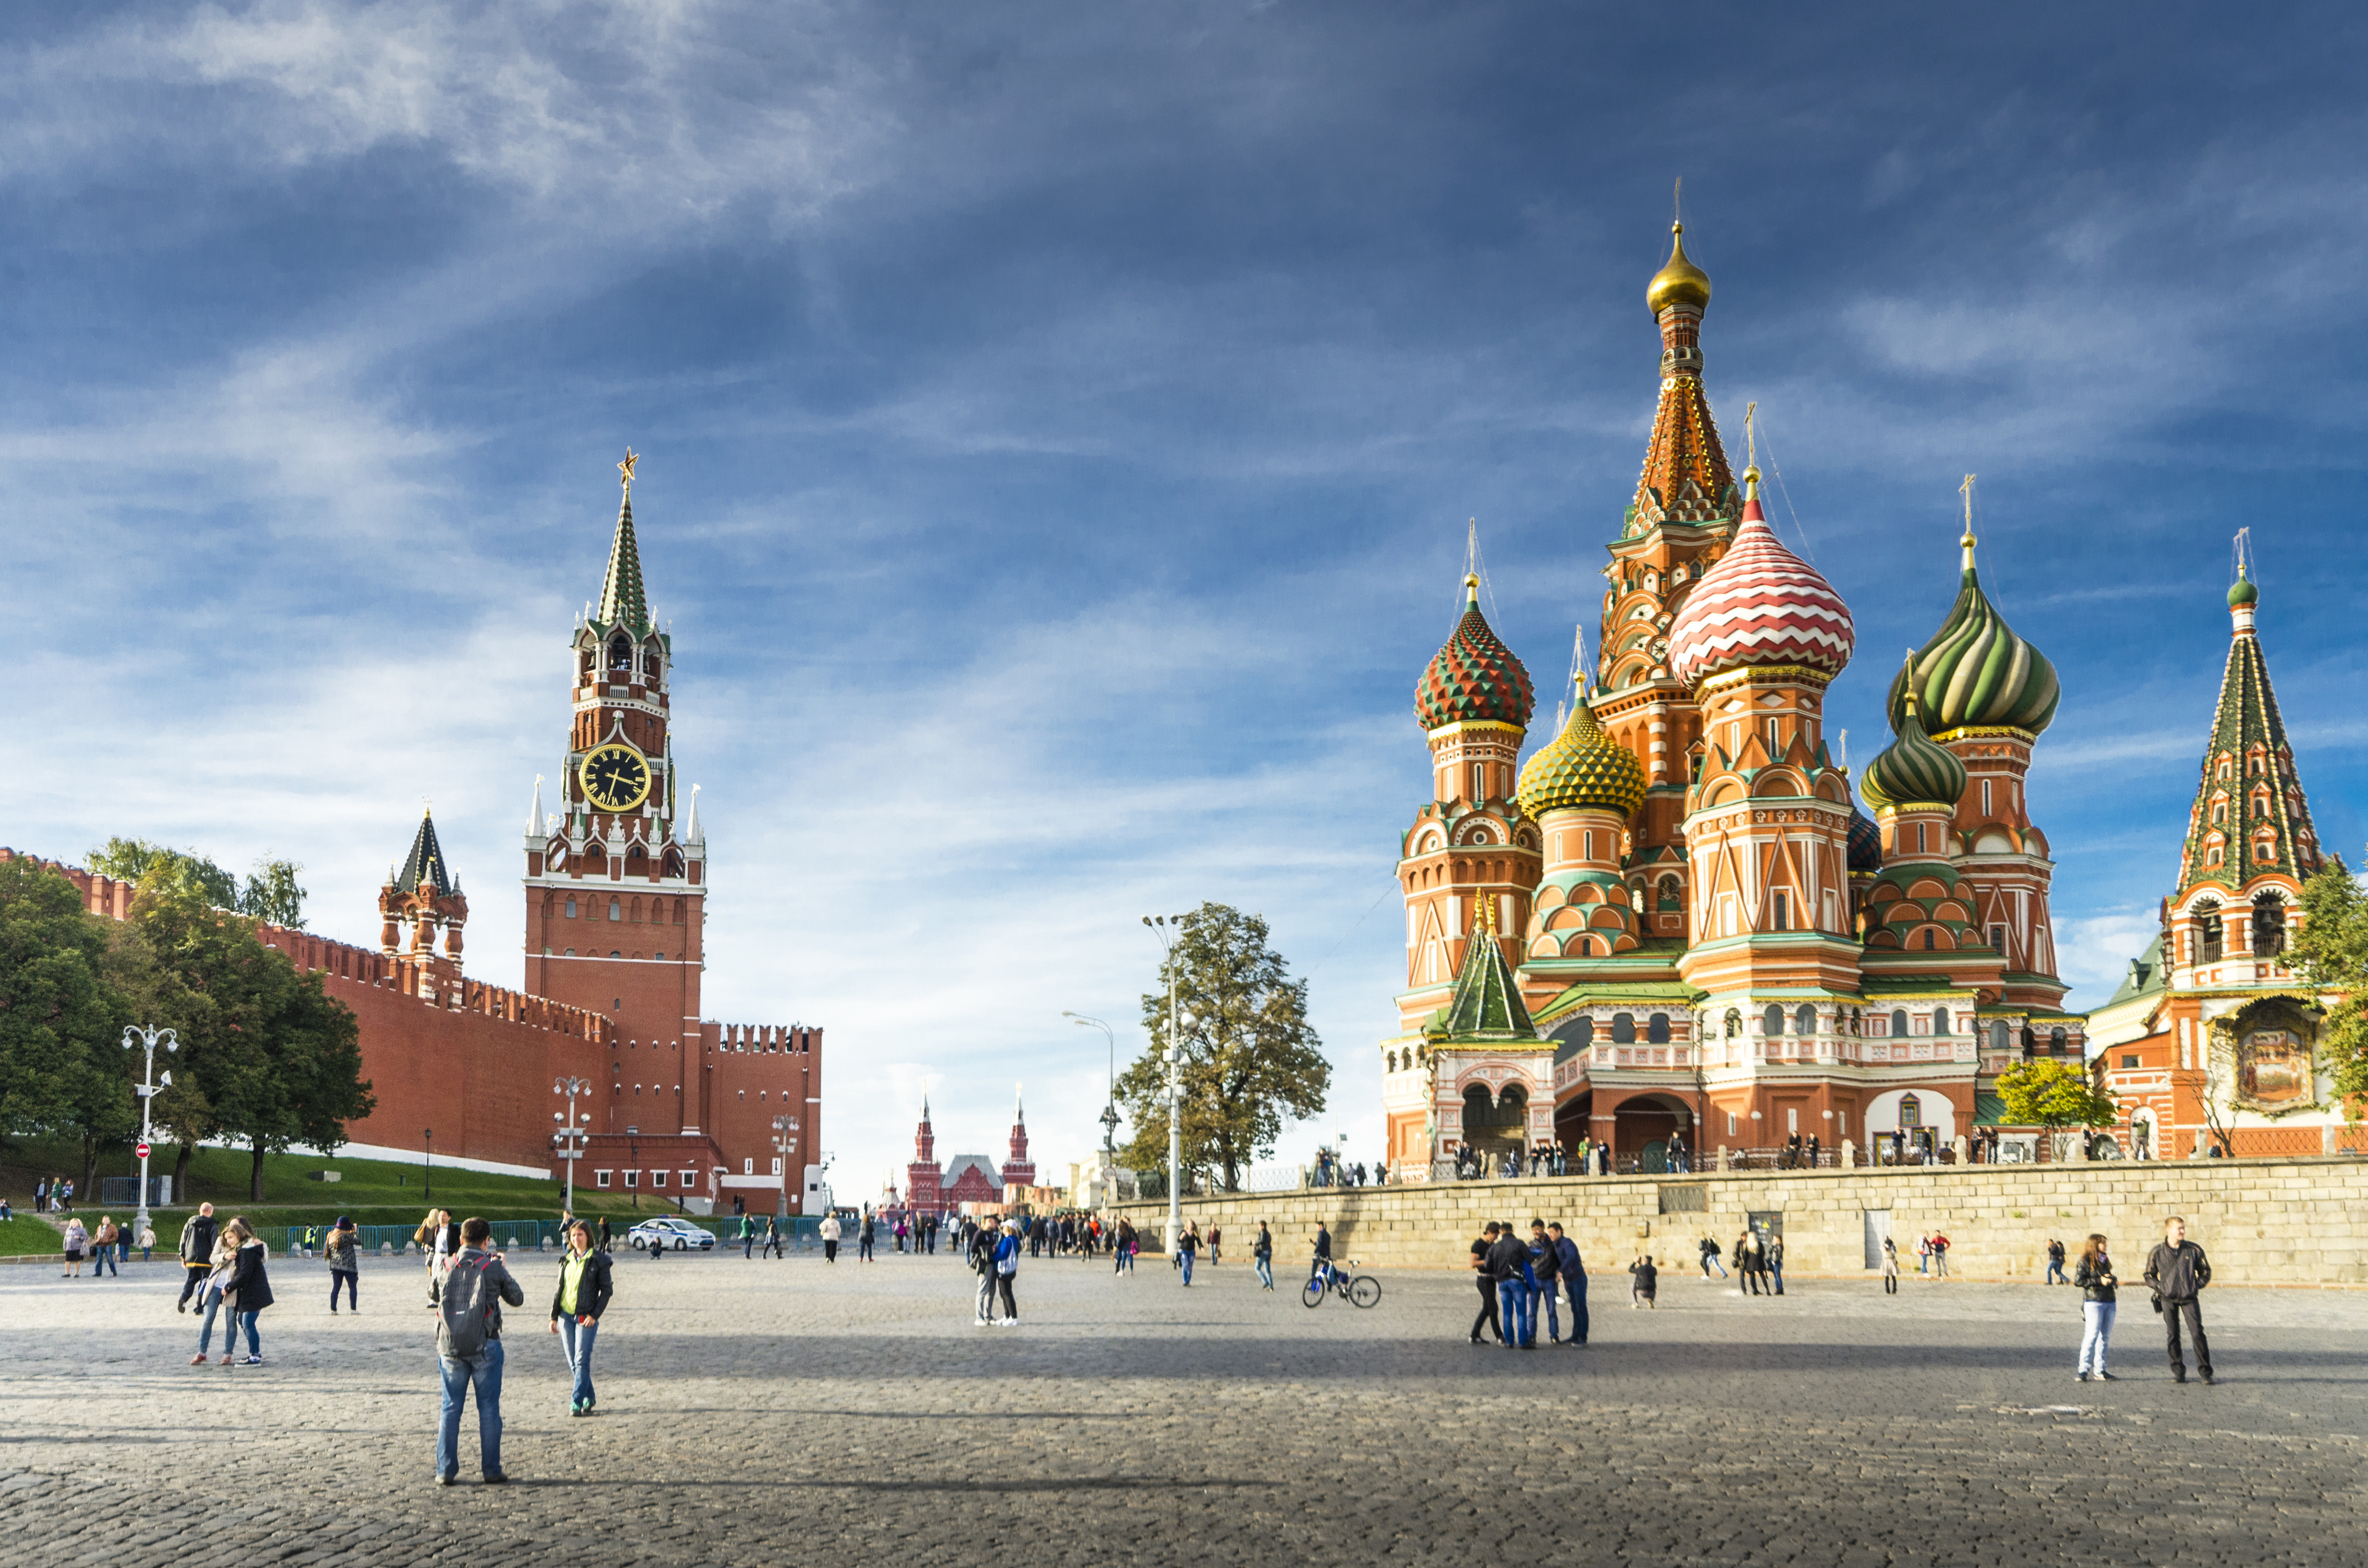 History of Moscow's Kremlin and Red Square